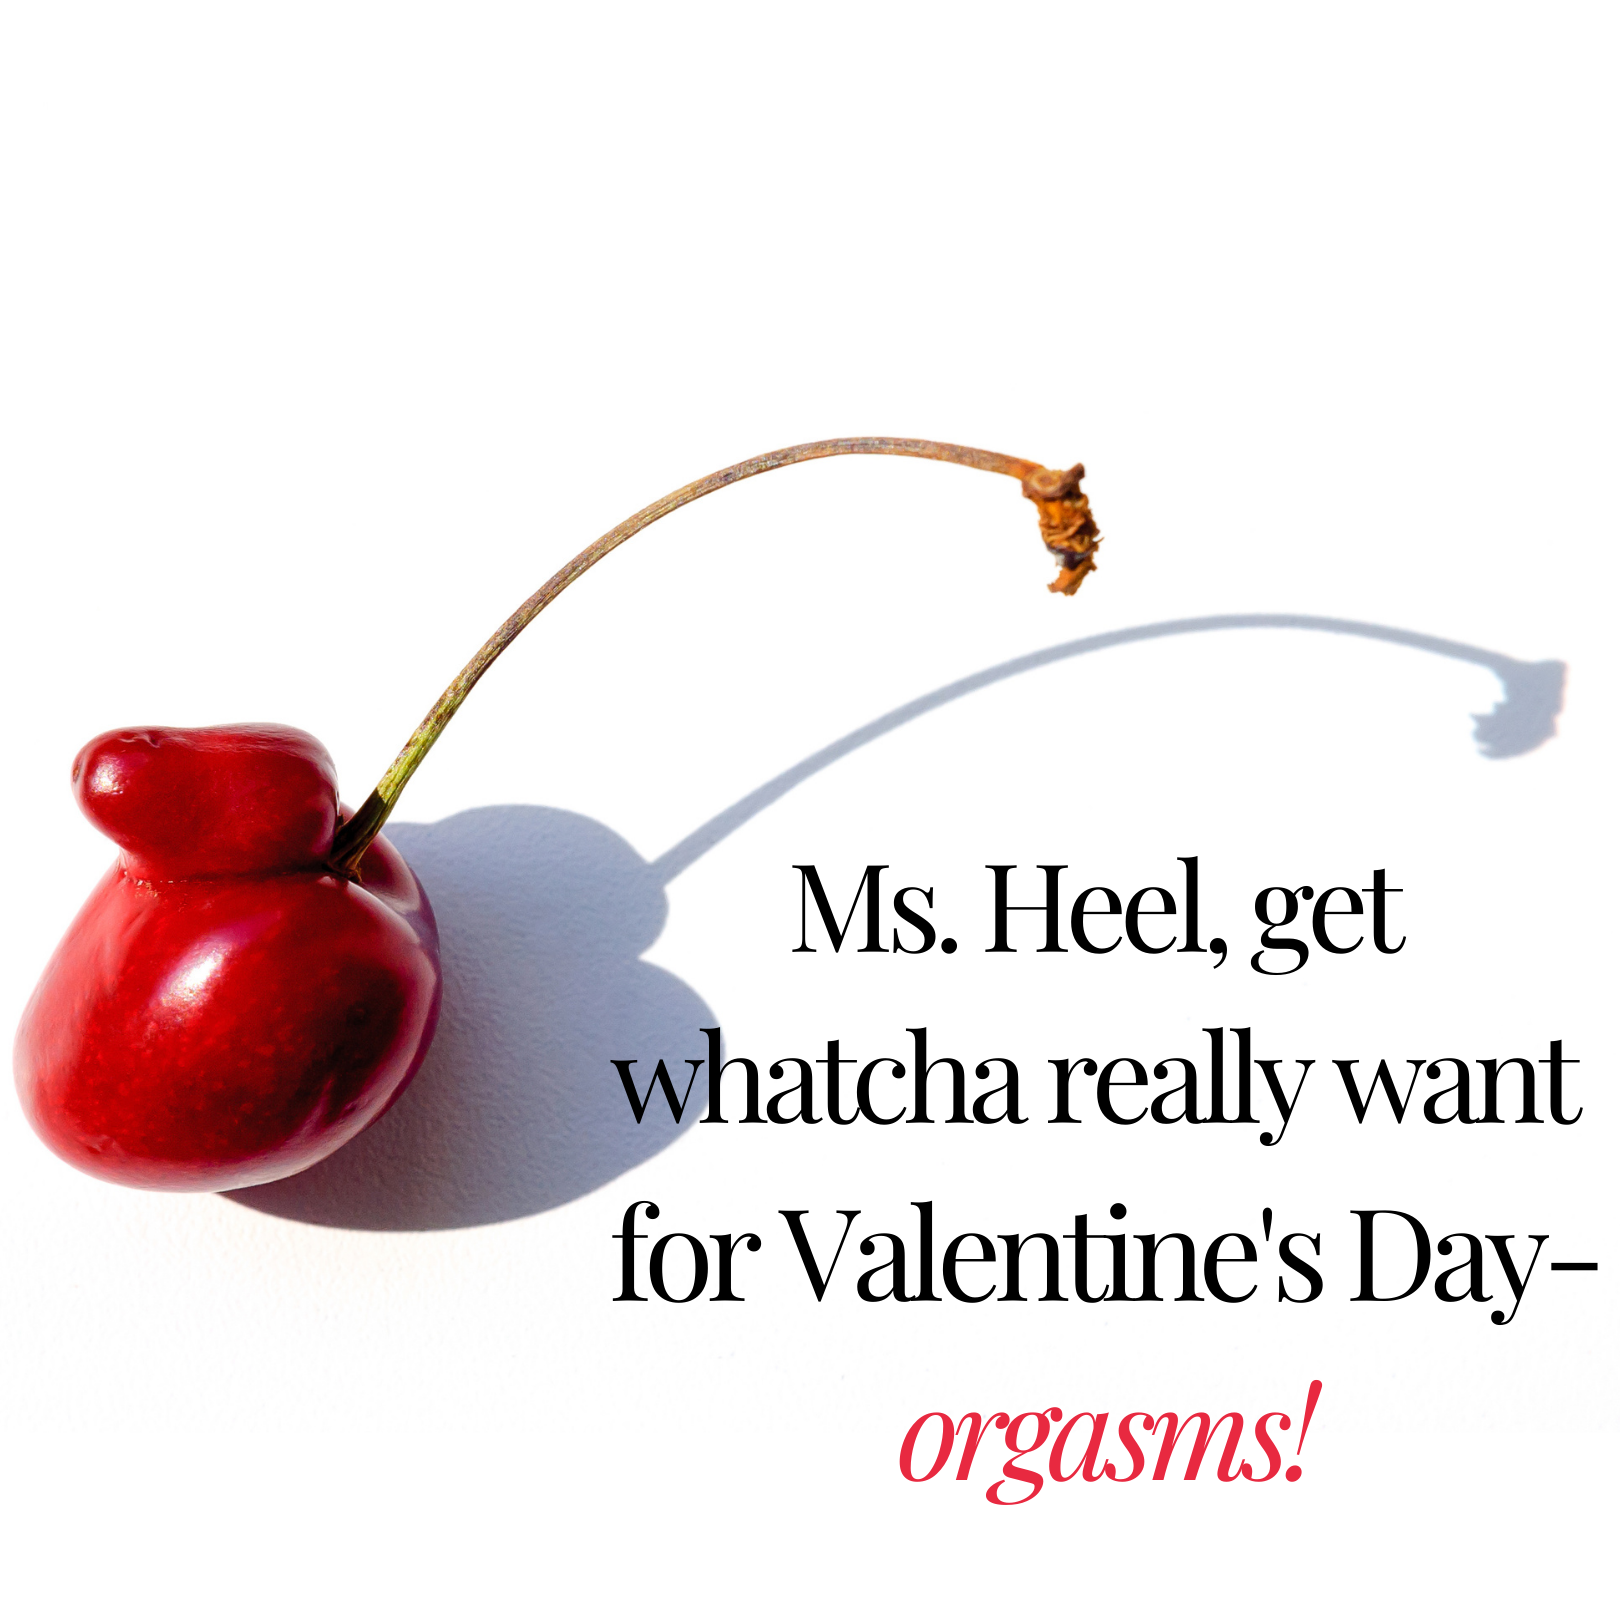 The perfect Valentine's Day gift that keeps giving-orgasms!